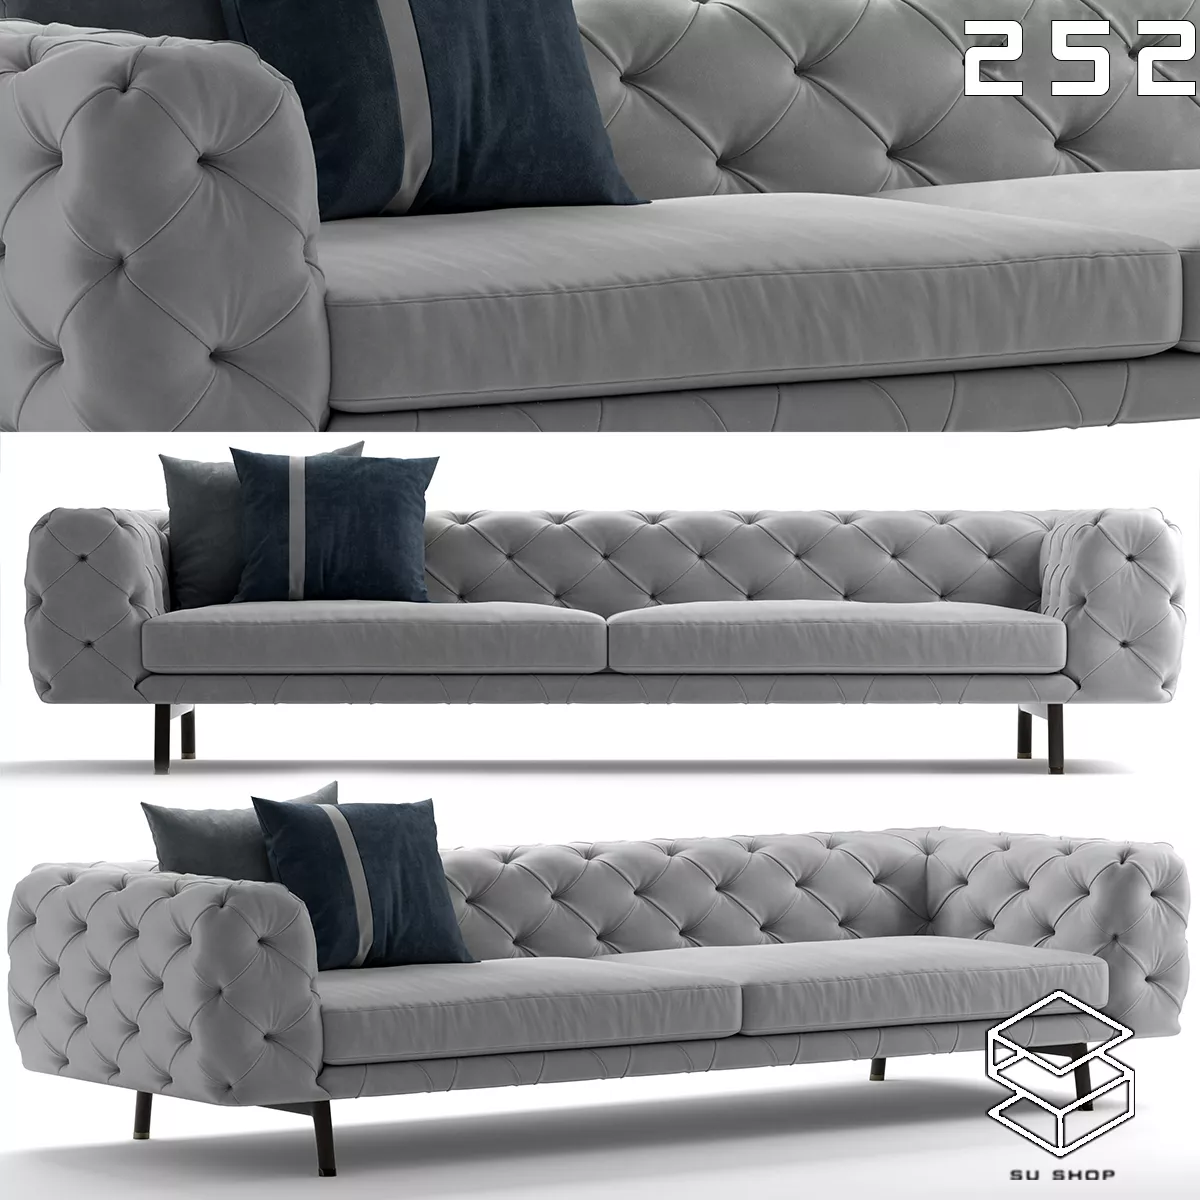 MODERN SOFA - SKETCHUP 3D MODEL - VRAY OR ENSCAPE - ID13555